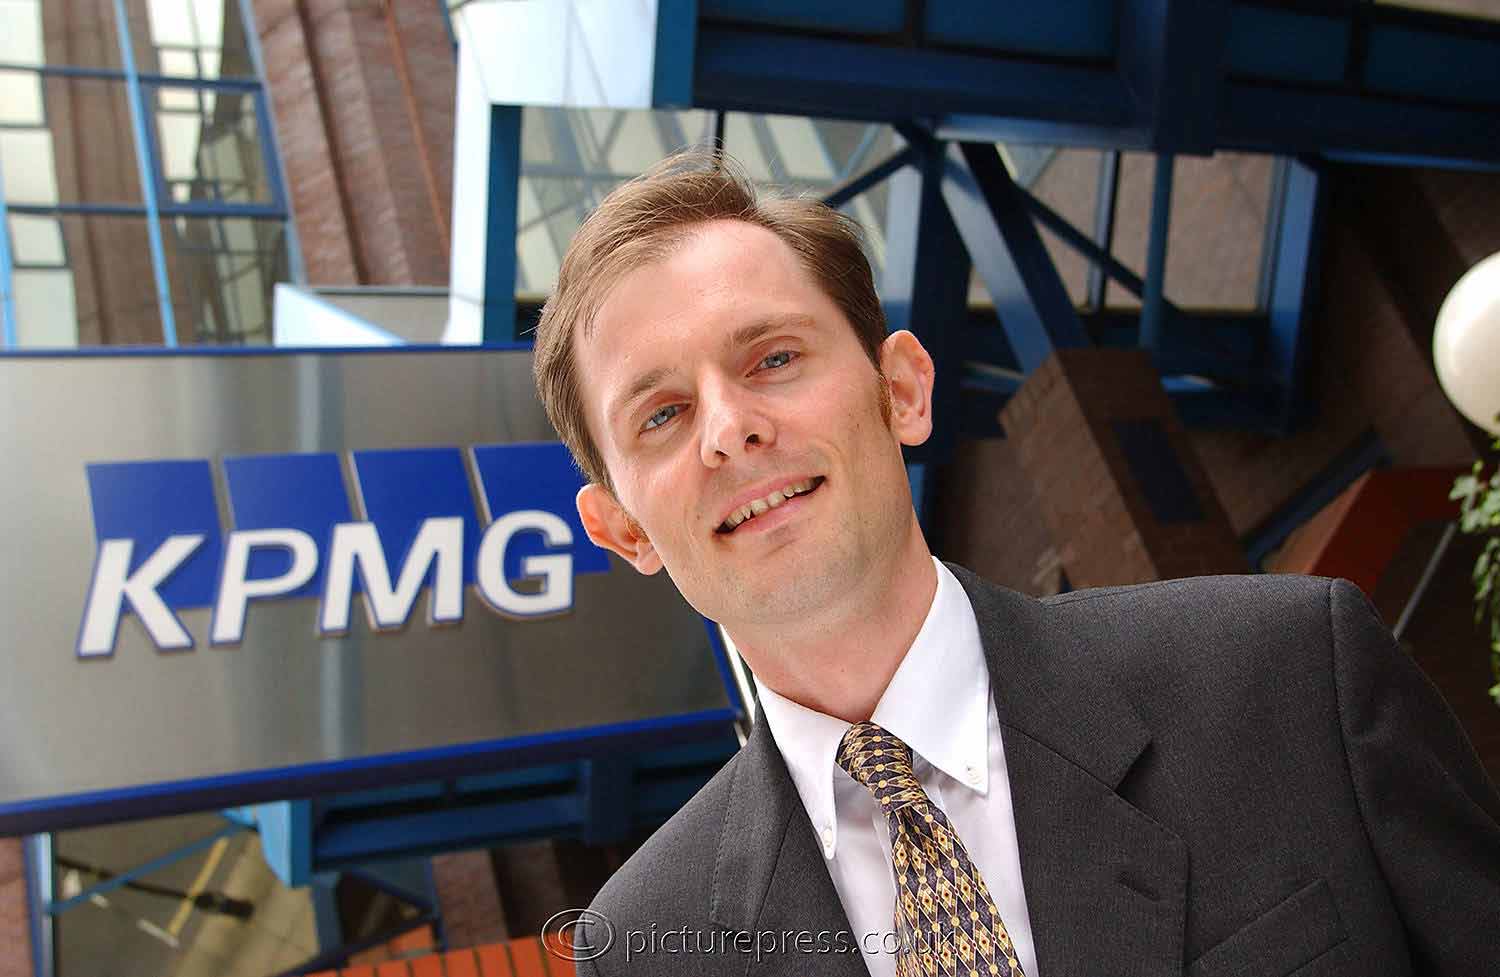 executive portrait kpmg at an event in Birmingham